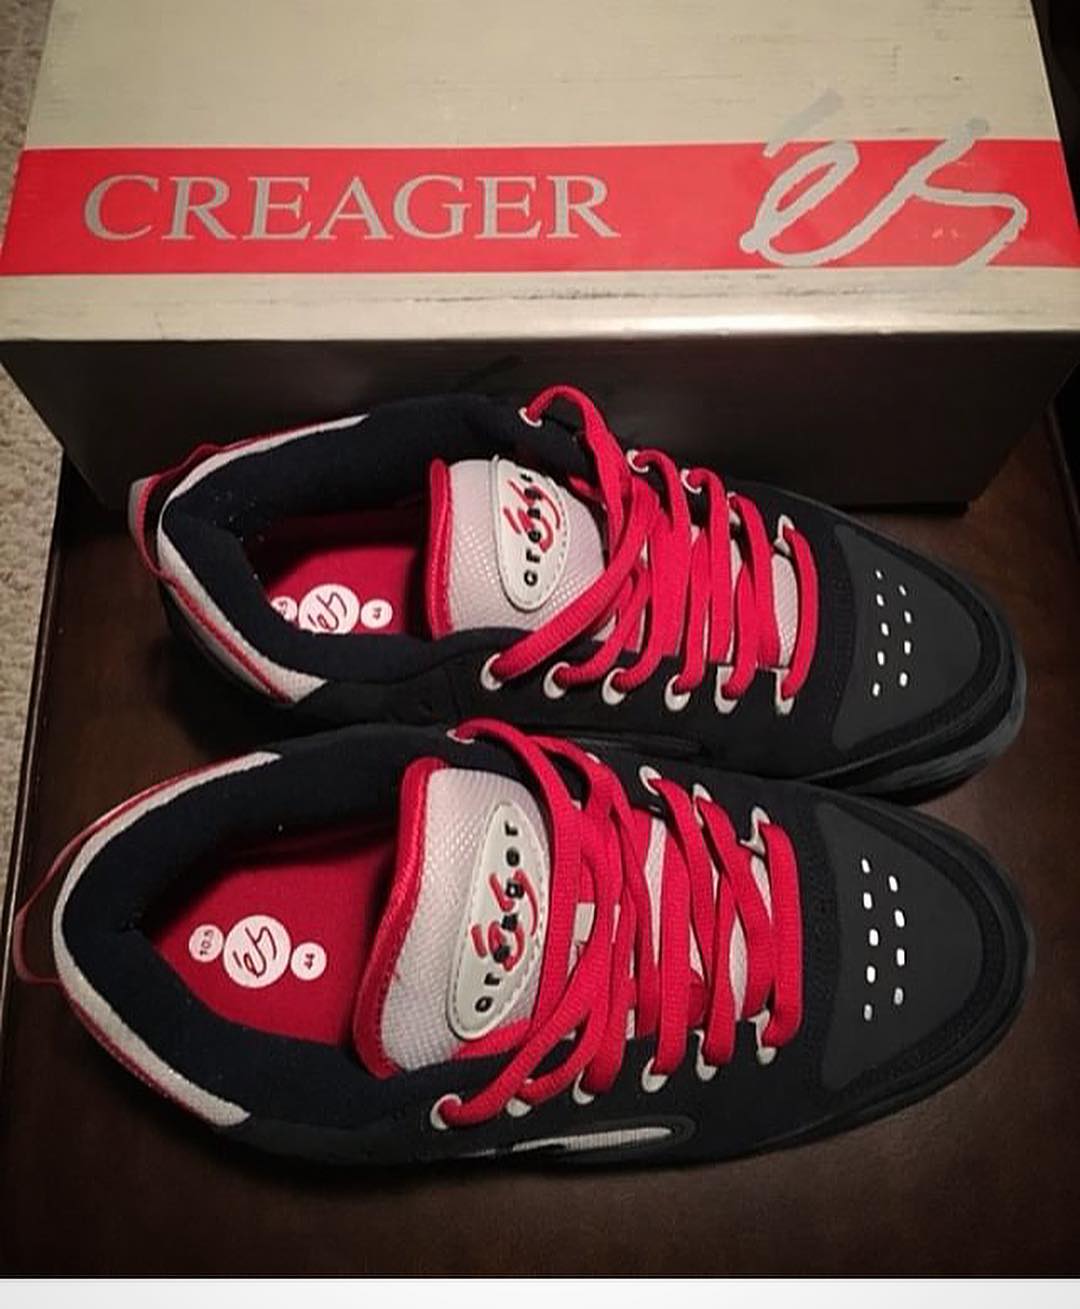 @brza1981 hit our DM with these Creagers.  #sk8shoewars #esskateboarding #ronniecreager